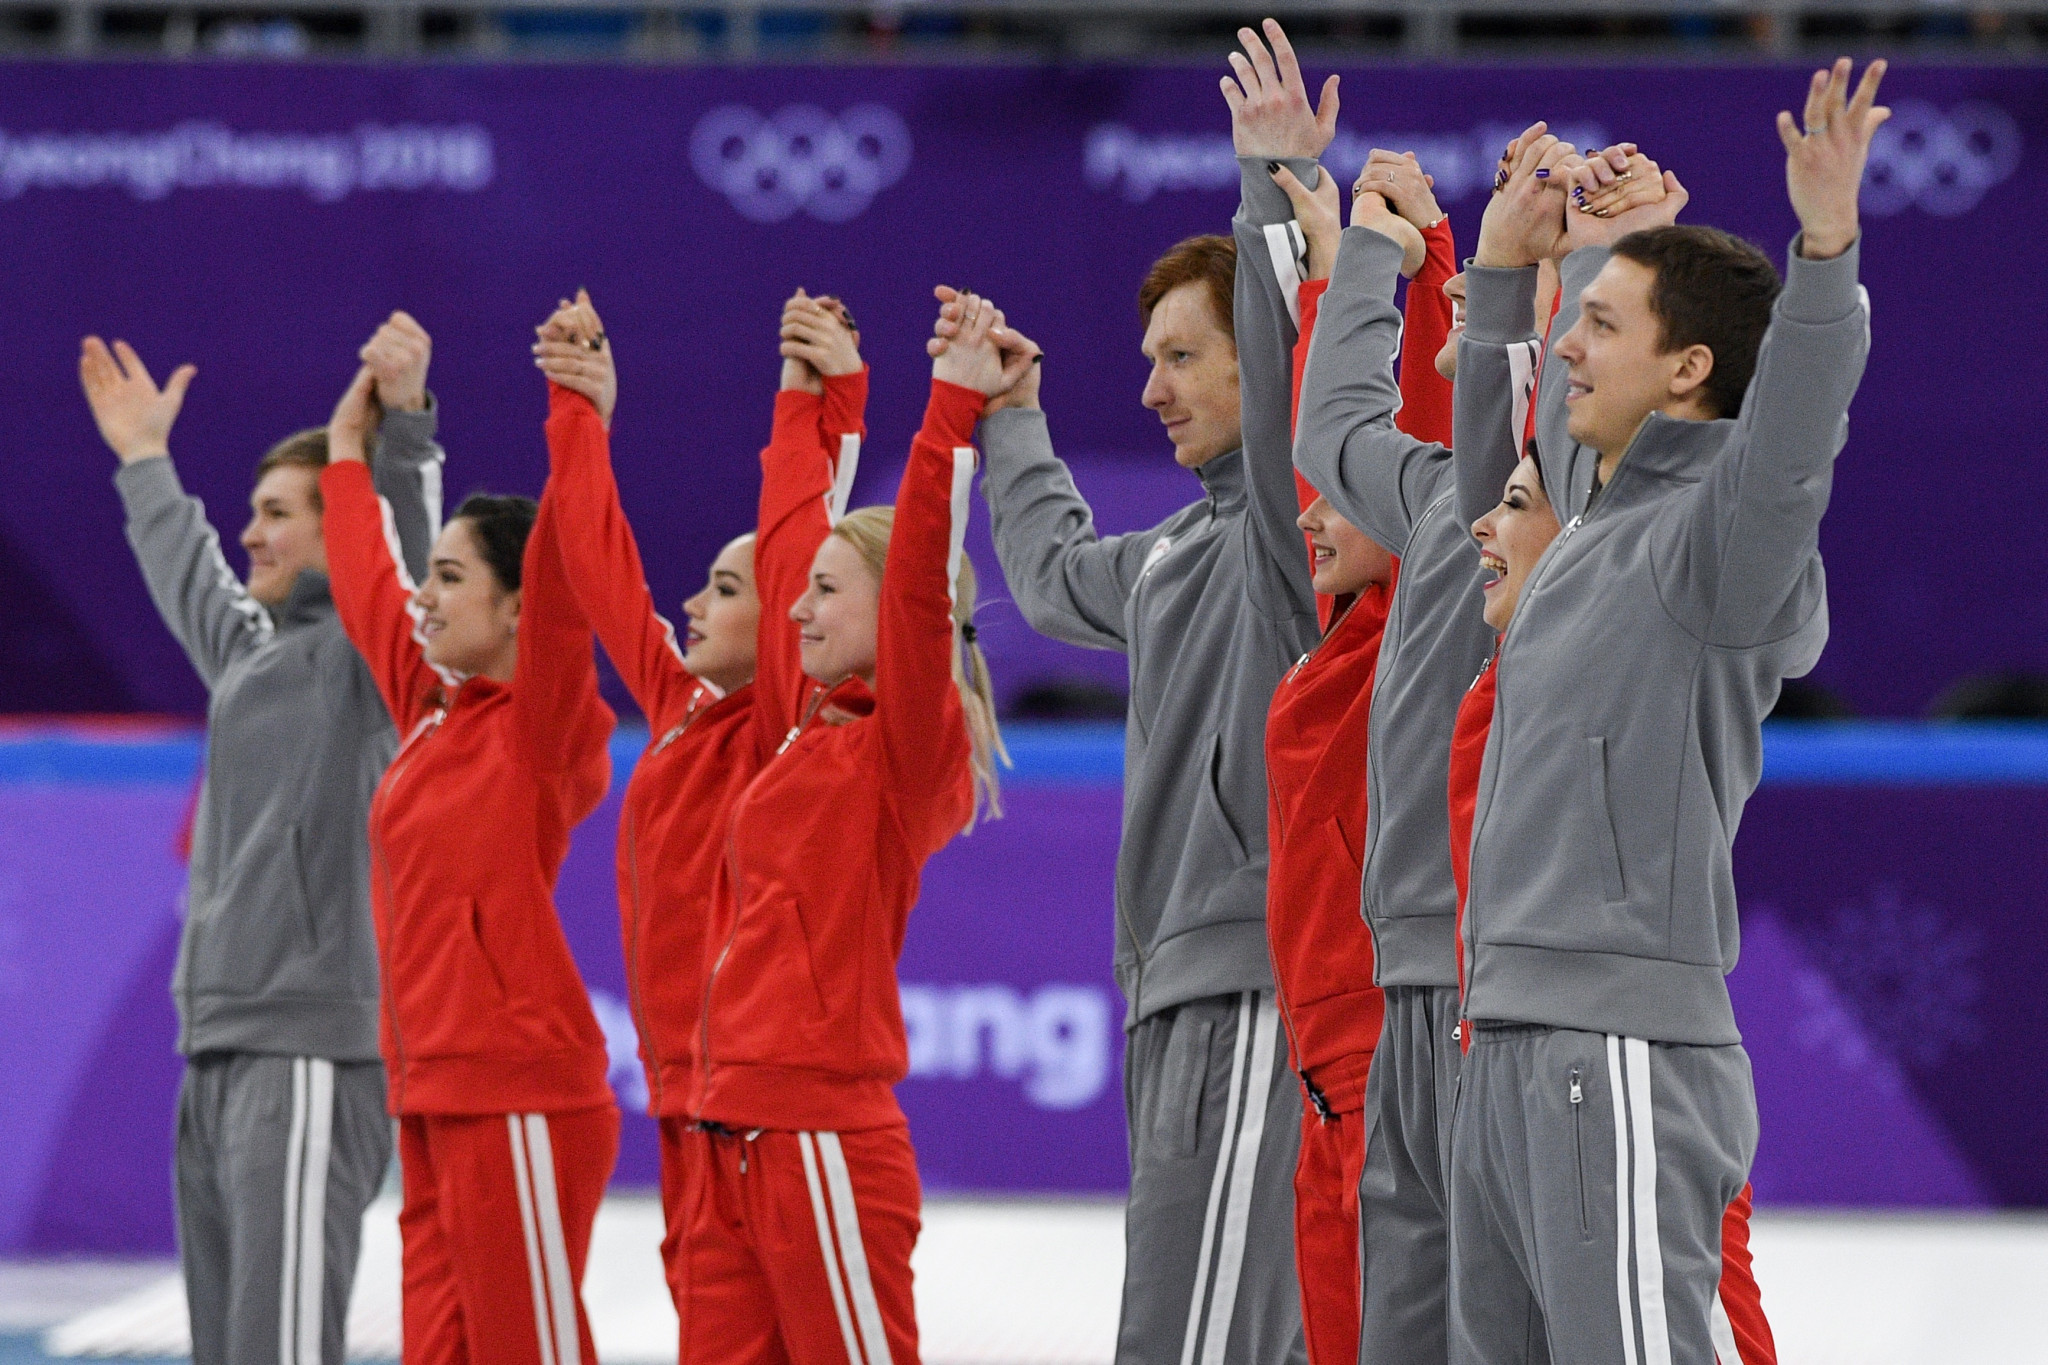 Russia’s figure skating team, which won silver here at Pyeongchang 2018 yesterday, paid their respects to those killed in the plane crash ©Getty Images